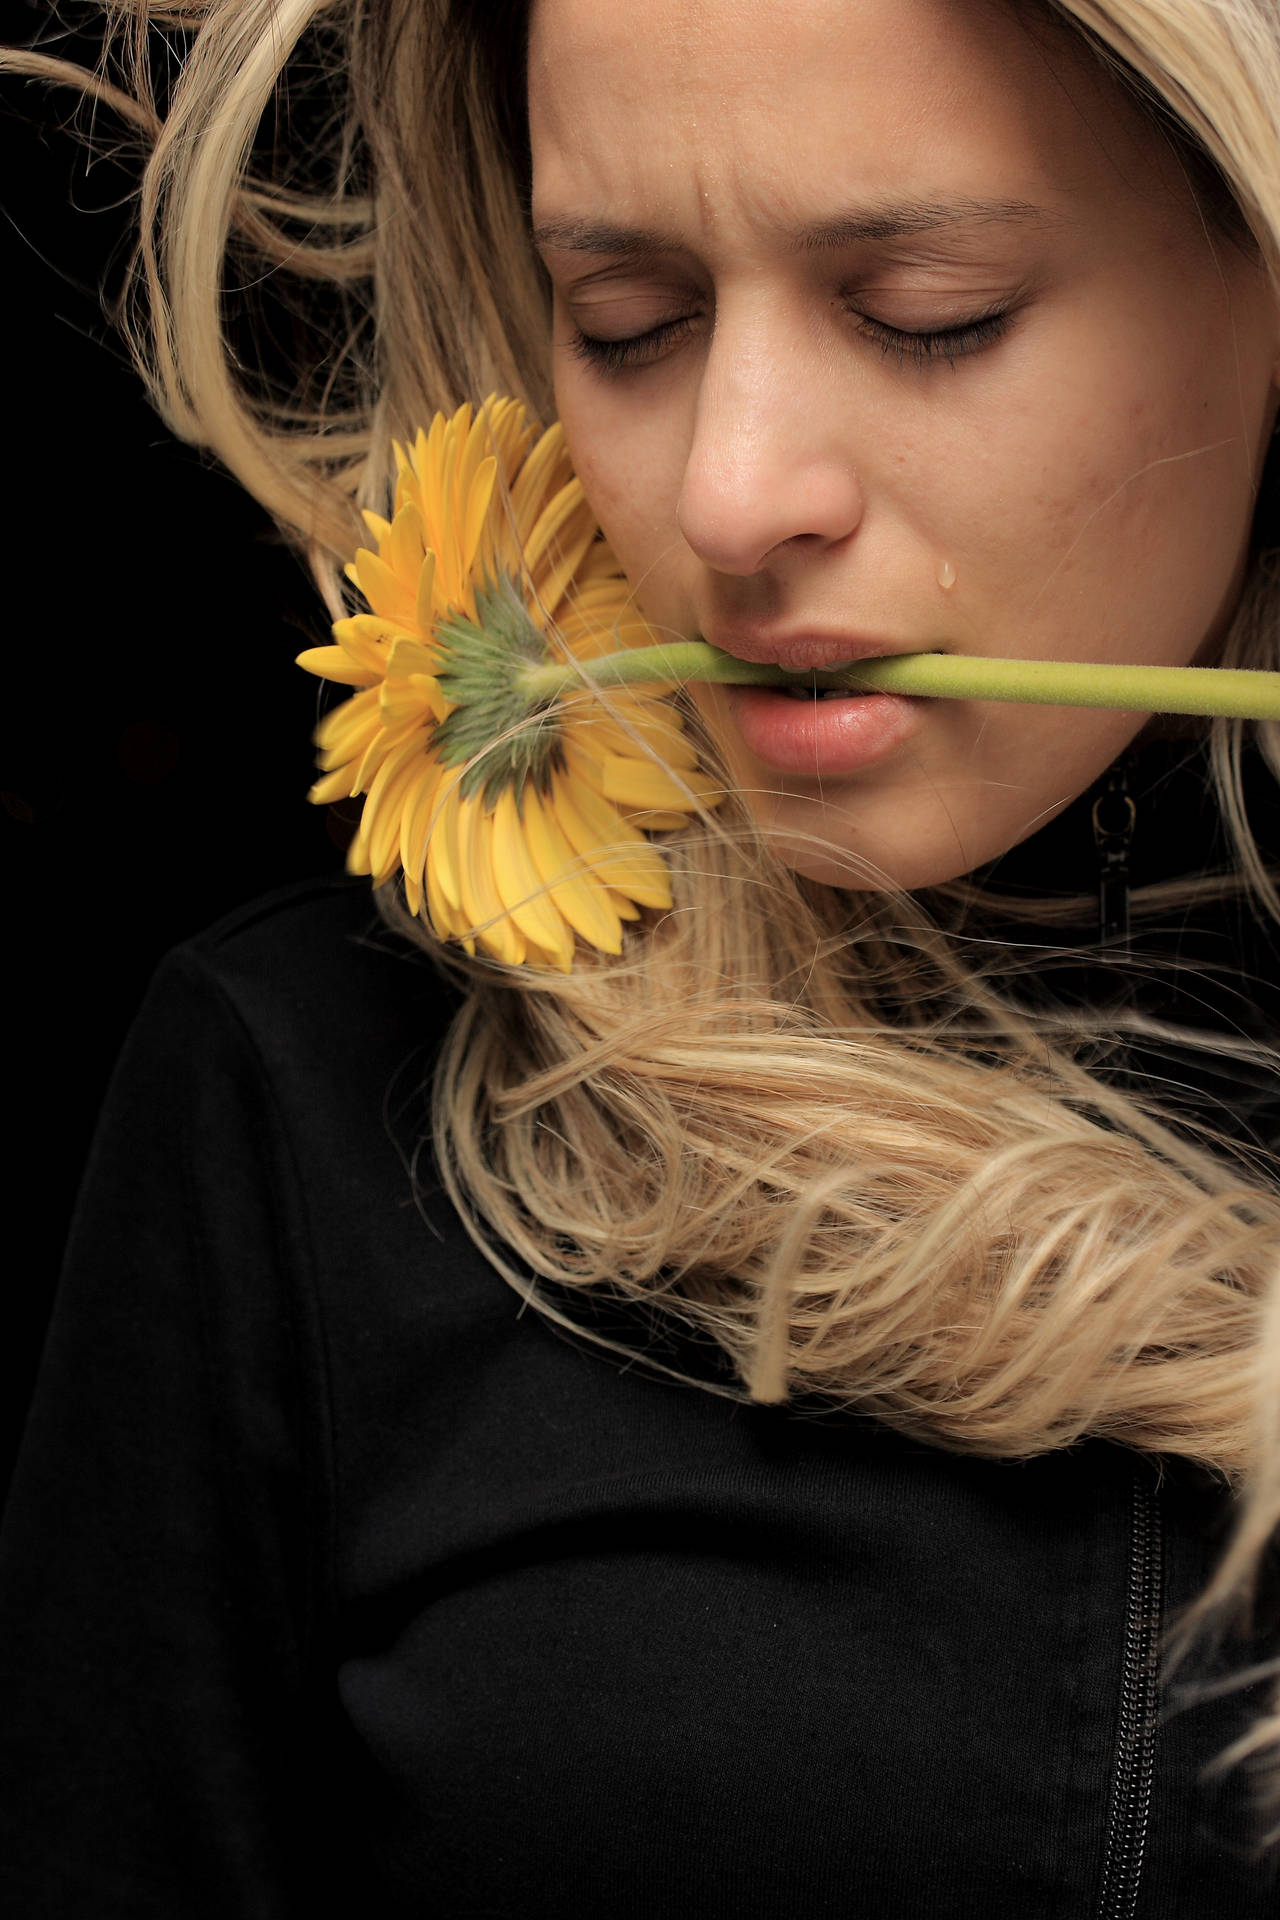 So Sad Woman With Sunflower Wallpaper